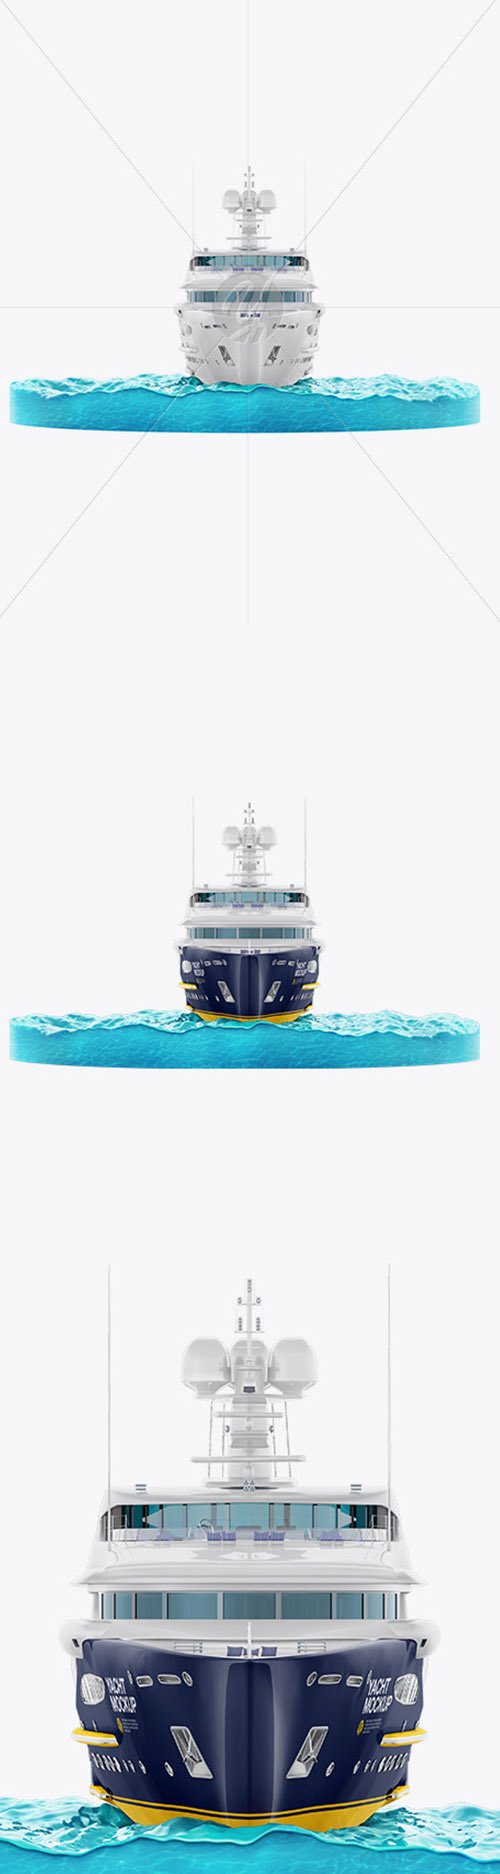 Yacht w/water Mockup - Front View 56034